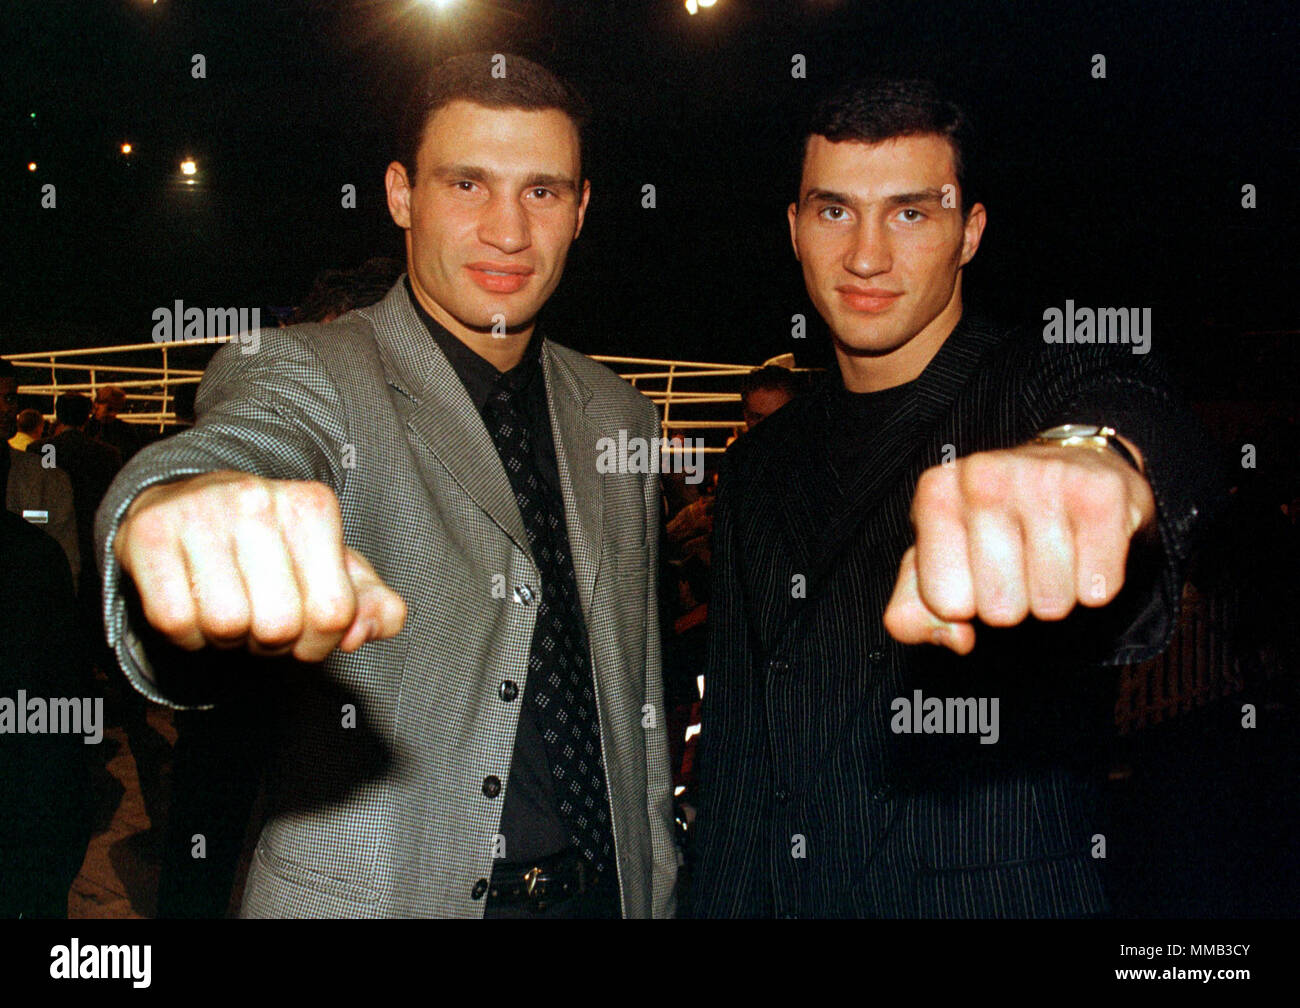 Boxing: Dortmund, Germany, 28.02.1998, brothers Vitali (left) and Wladimir Klitschko, heavyweight boxers pose with their fists Stock Photo